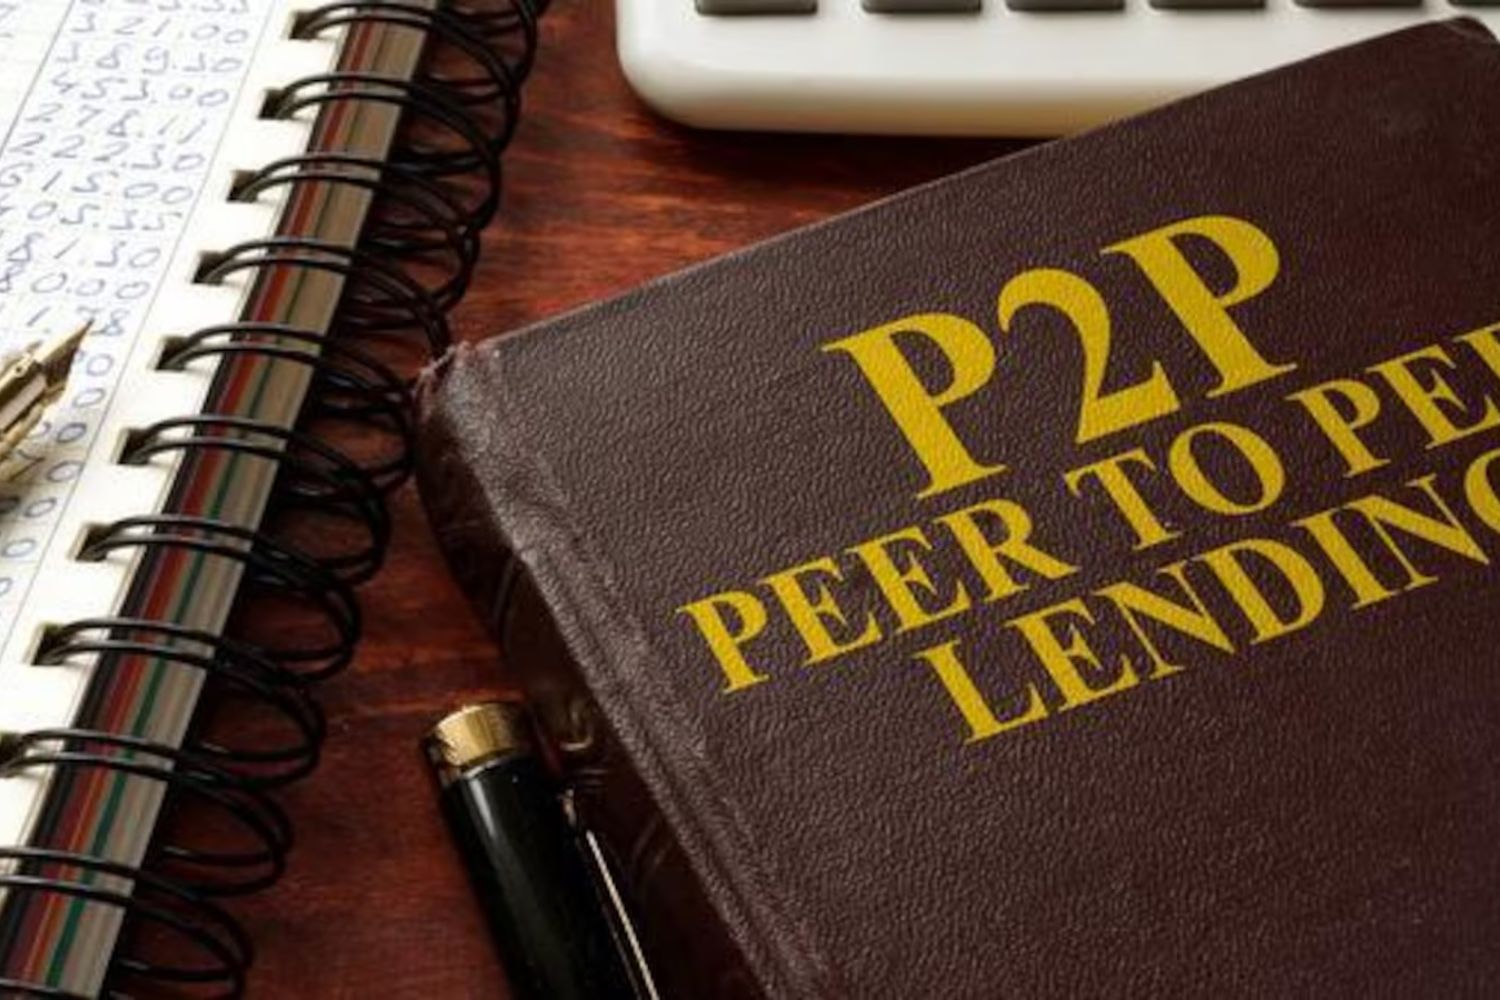 What Percent Of Millennials Use P2P